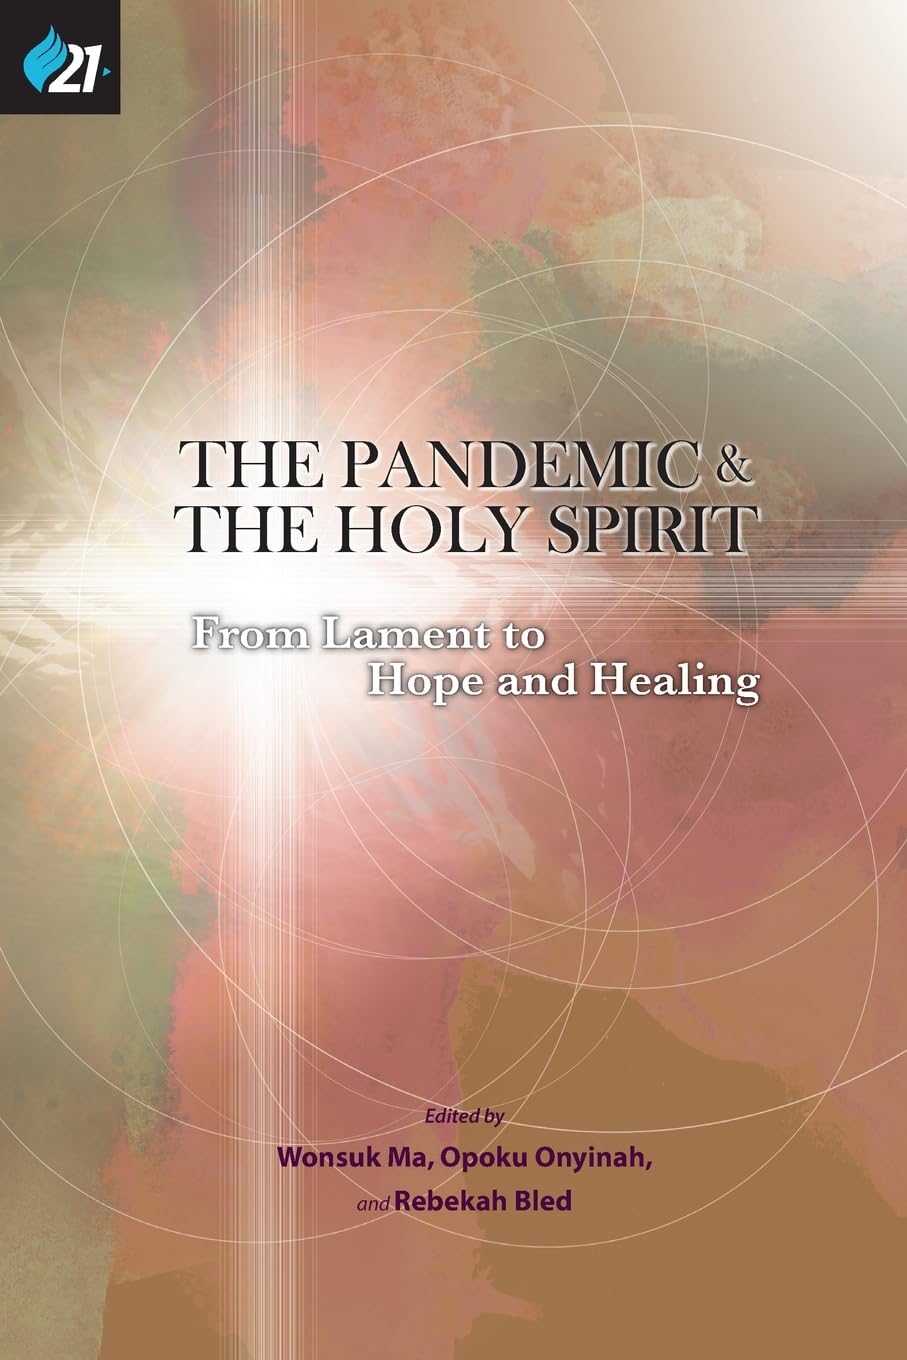  The Pandemic & The Holy Spirit: From Lament to Hope and Healing